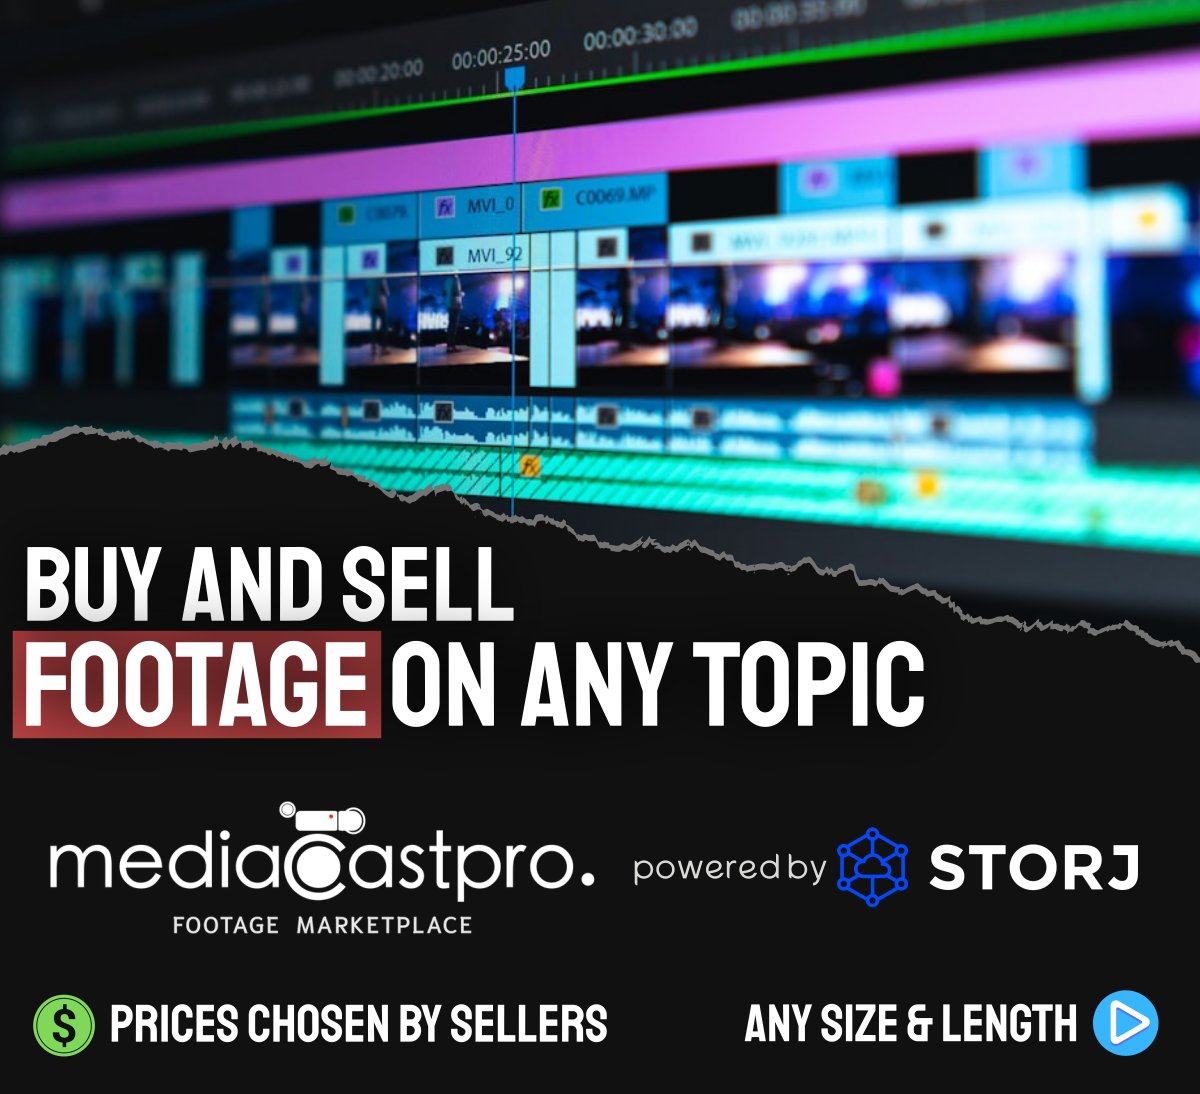 With @Storj, @mediaCastpro users can use as much space as they want for storage of large video files on their marketplace. As volume increases Storj allows mediaCastpro to scale rapidly & cost-effectively #global #cloudstorage